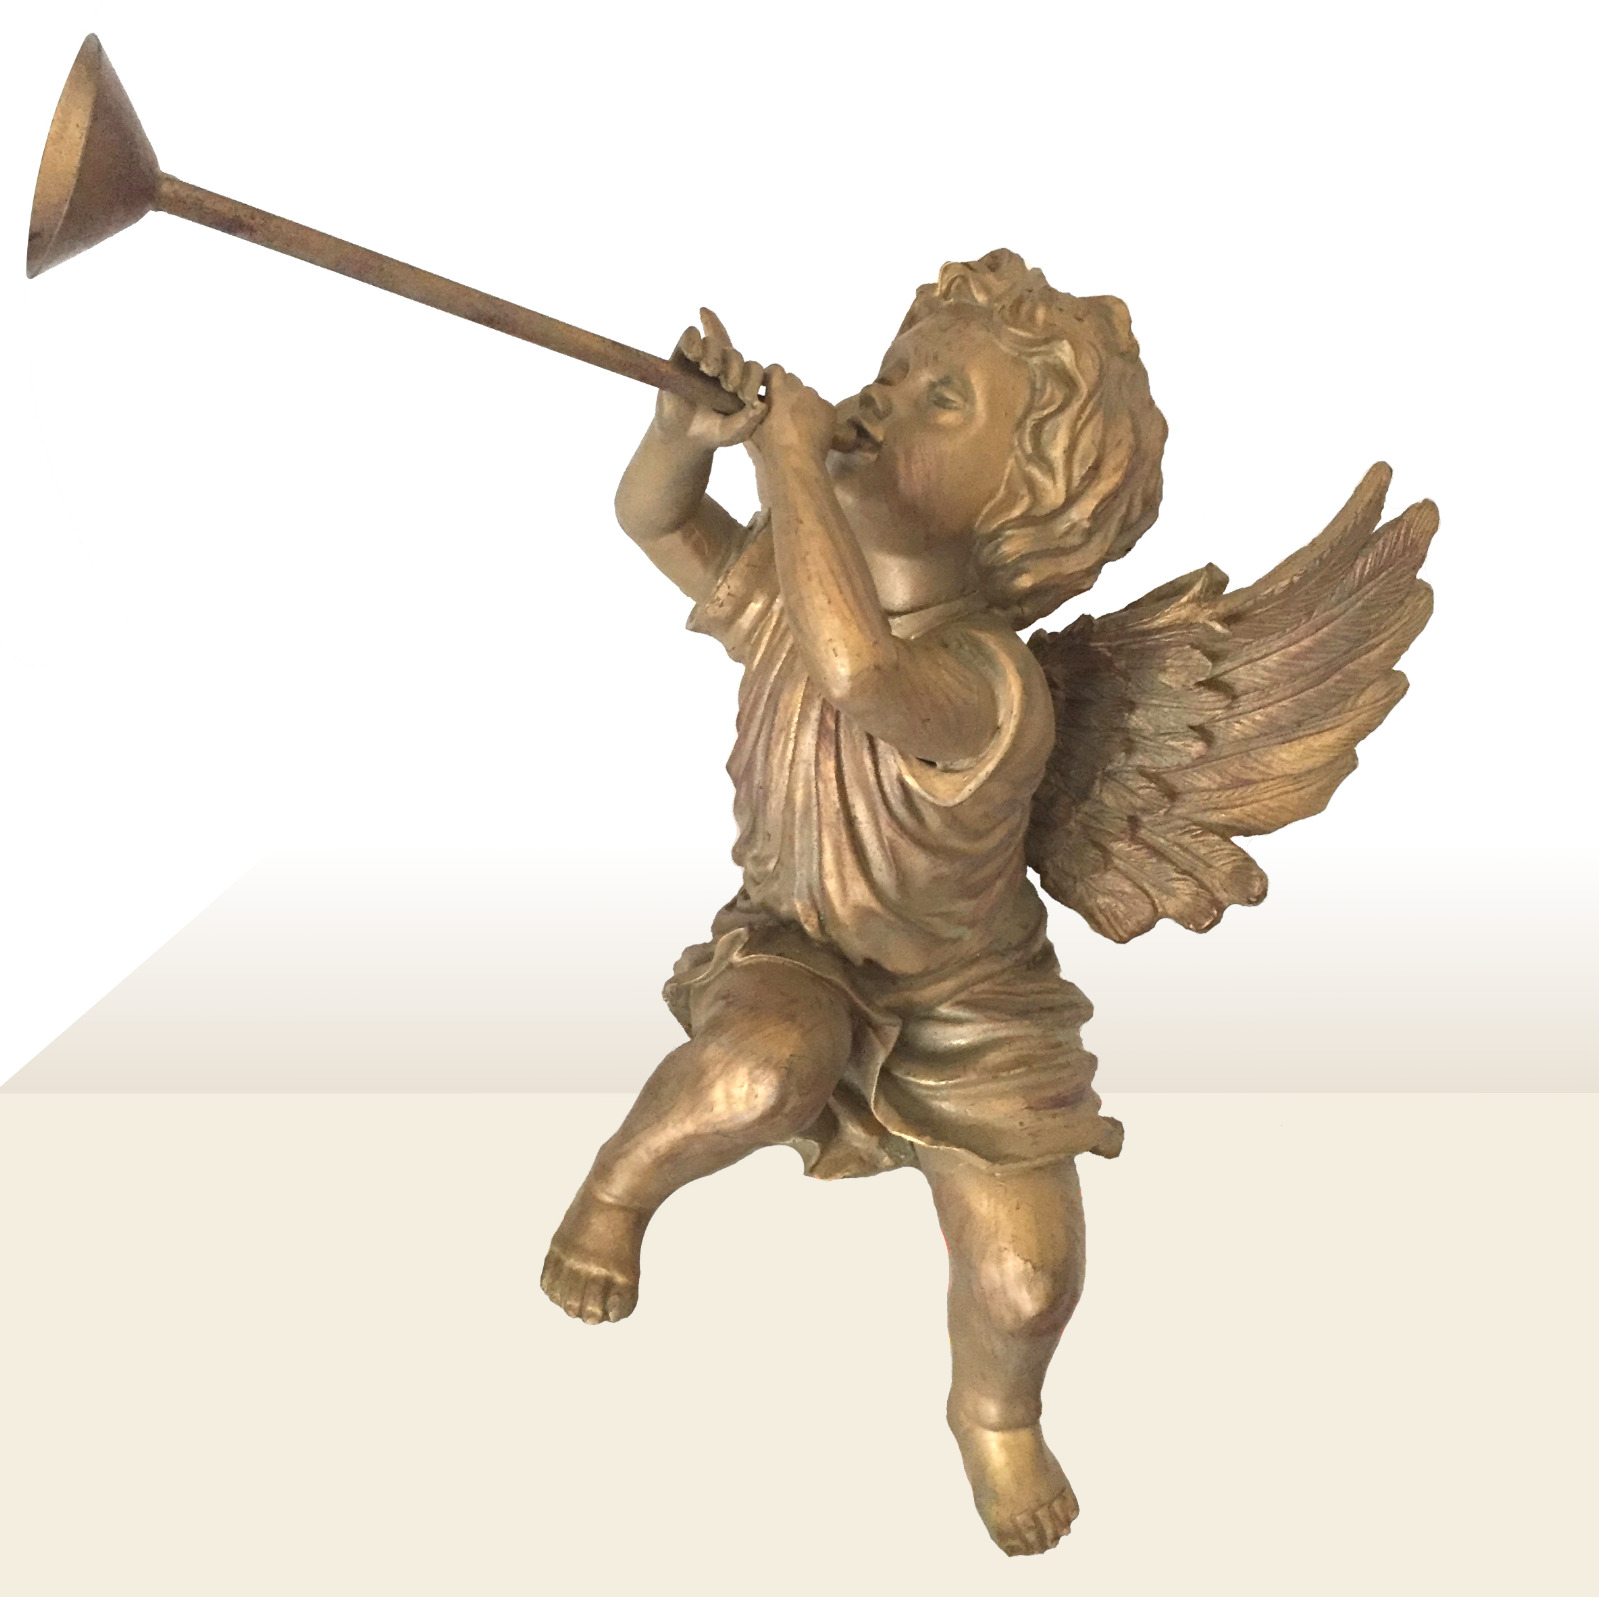 Gold Resin Trumpeting Sitting Angel Cherub with Wings Sculpture Renaissance